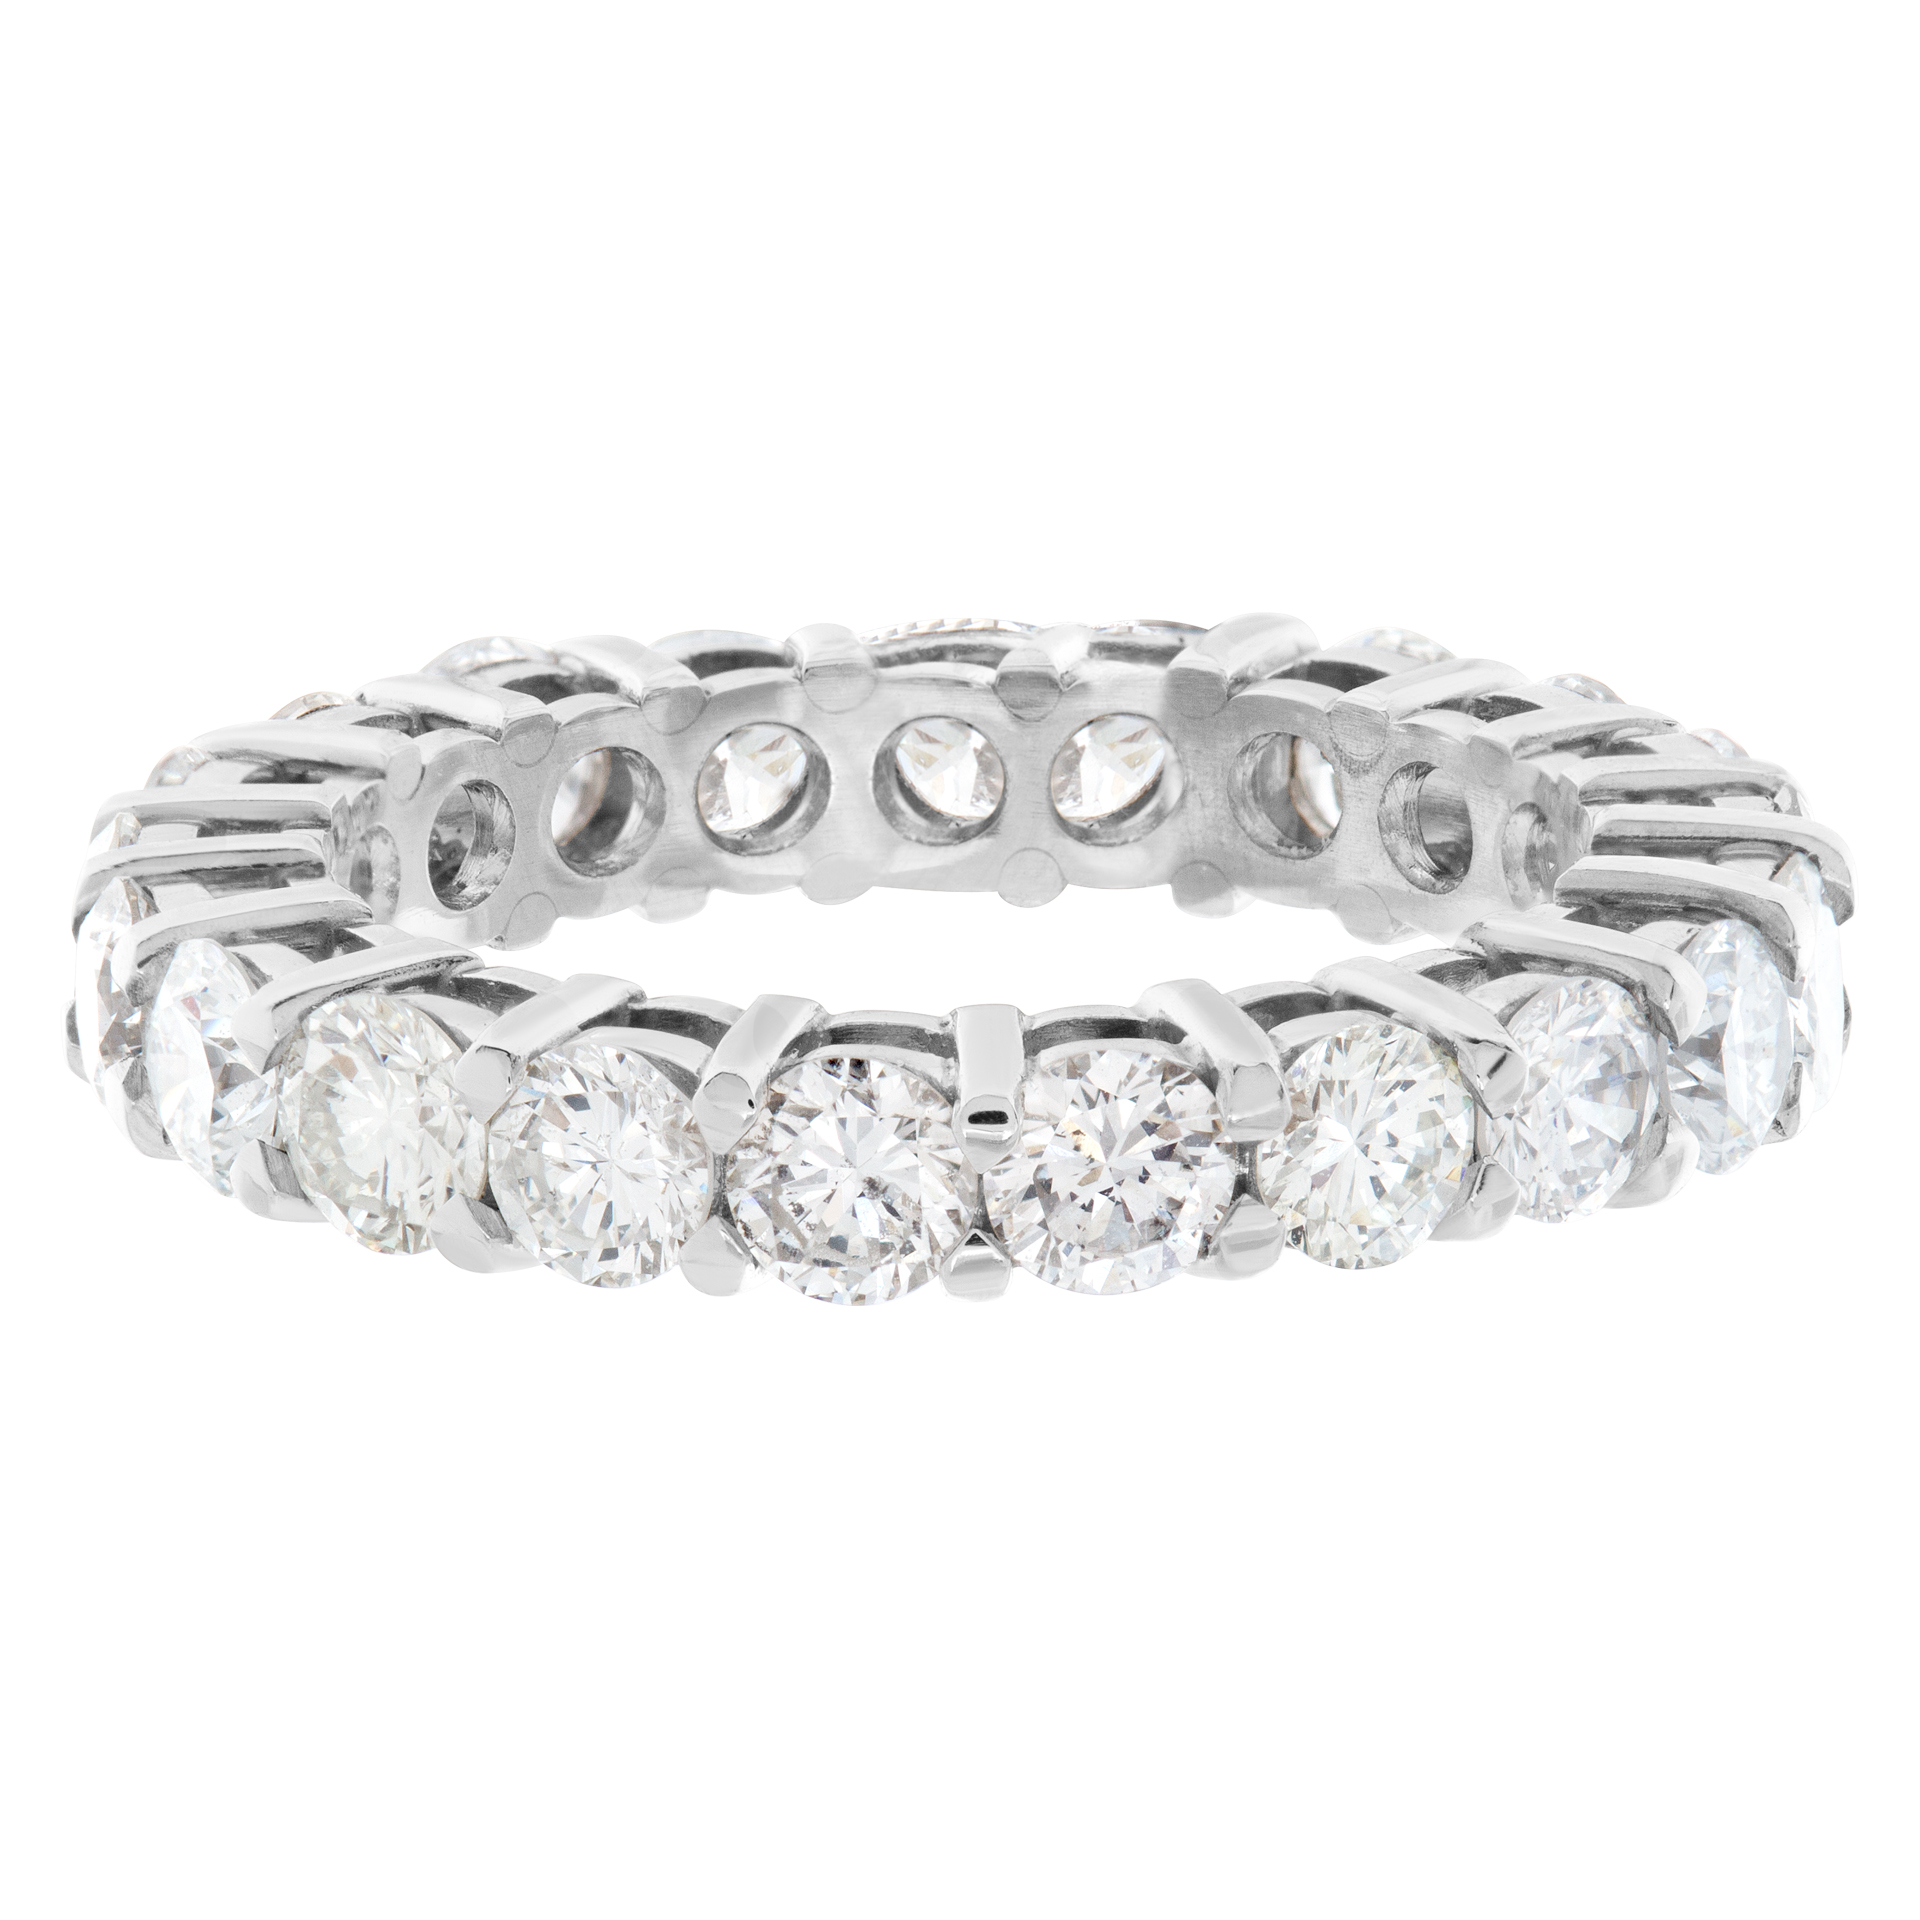 Round brilliant cut Diamonds eternity band in Platinum. Round brilliant cut diamonds total approx. weight: 2.72 carats. Size 5.75